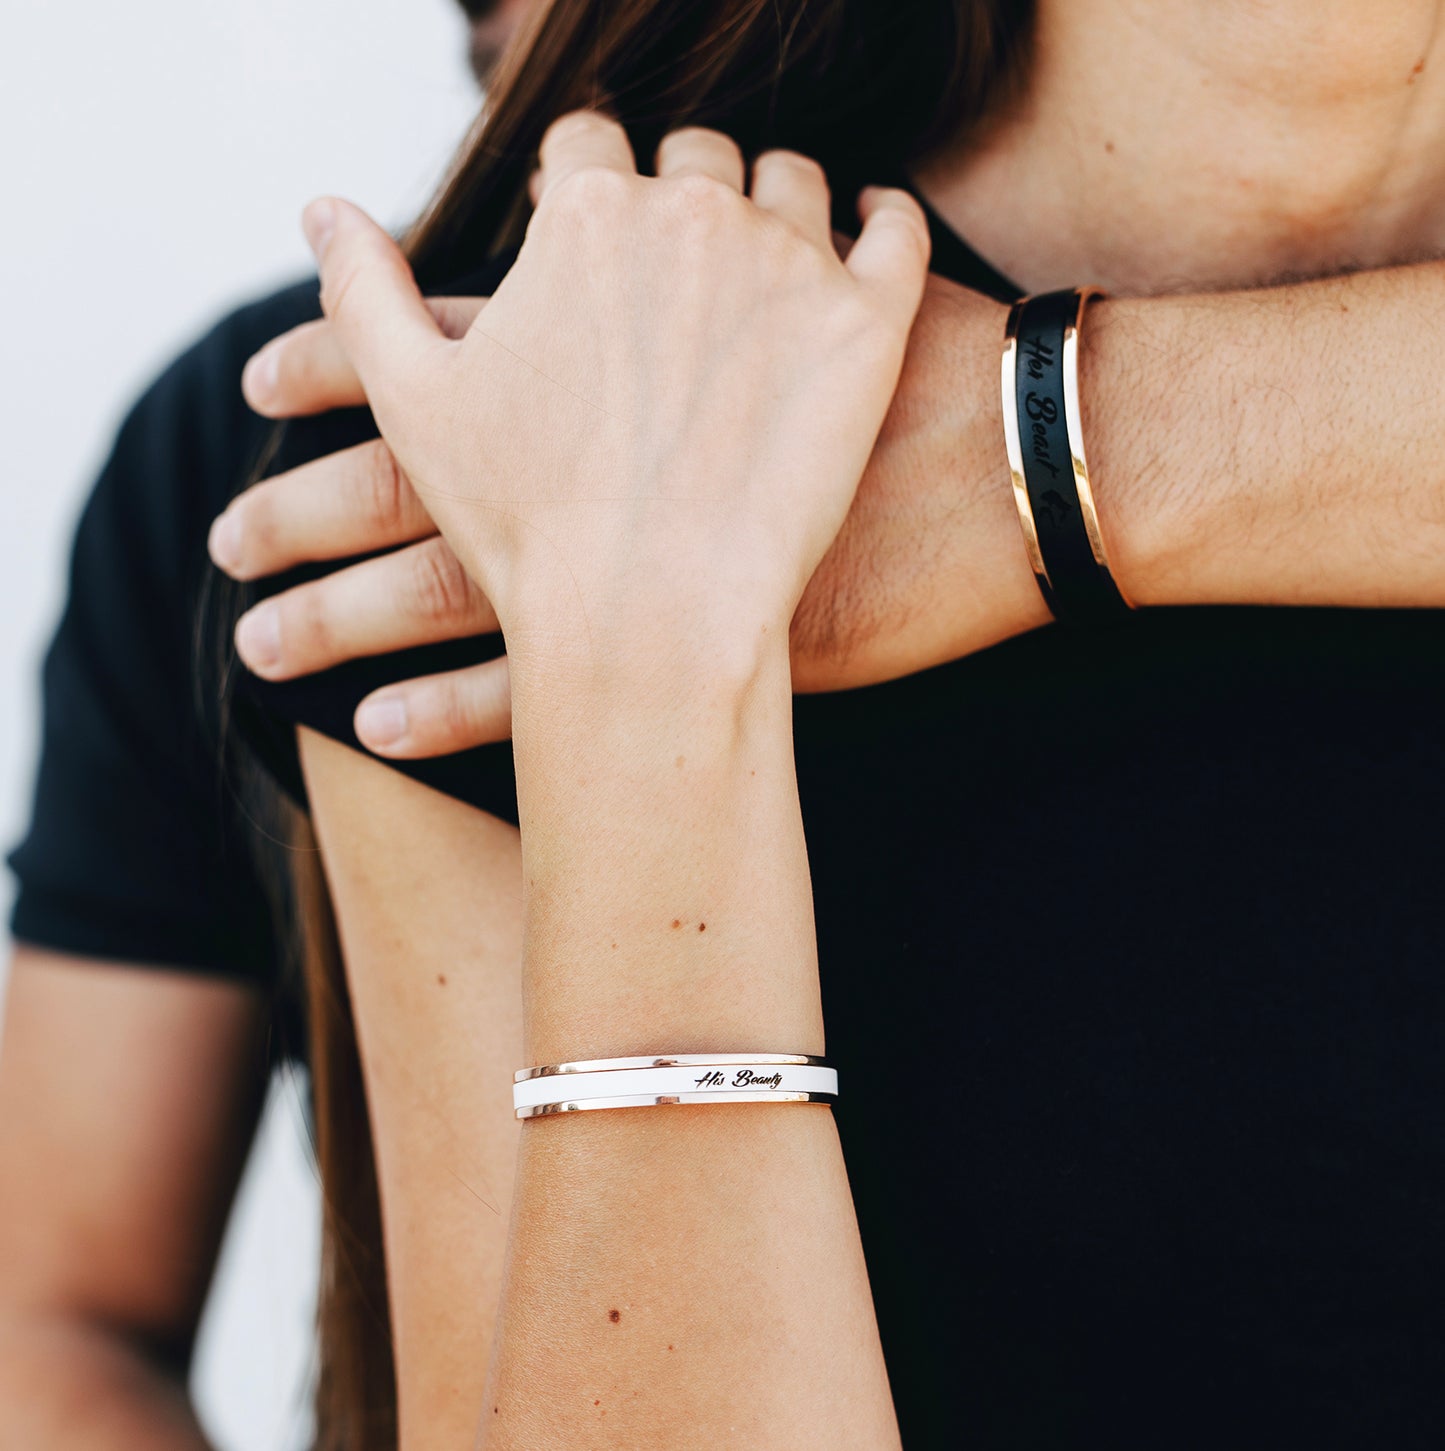 Matching Bracelets for Couples - Personalized Wedding Anniversary Gift